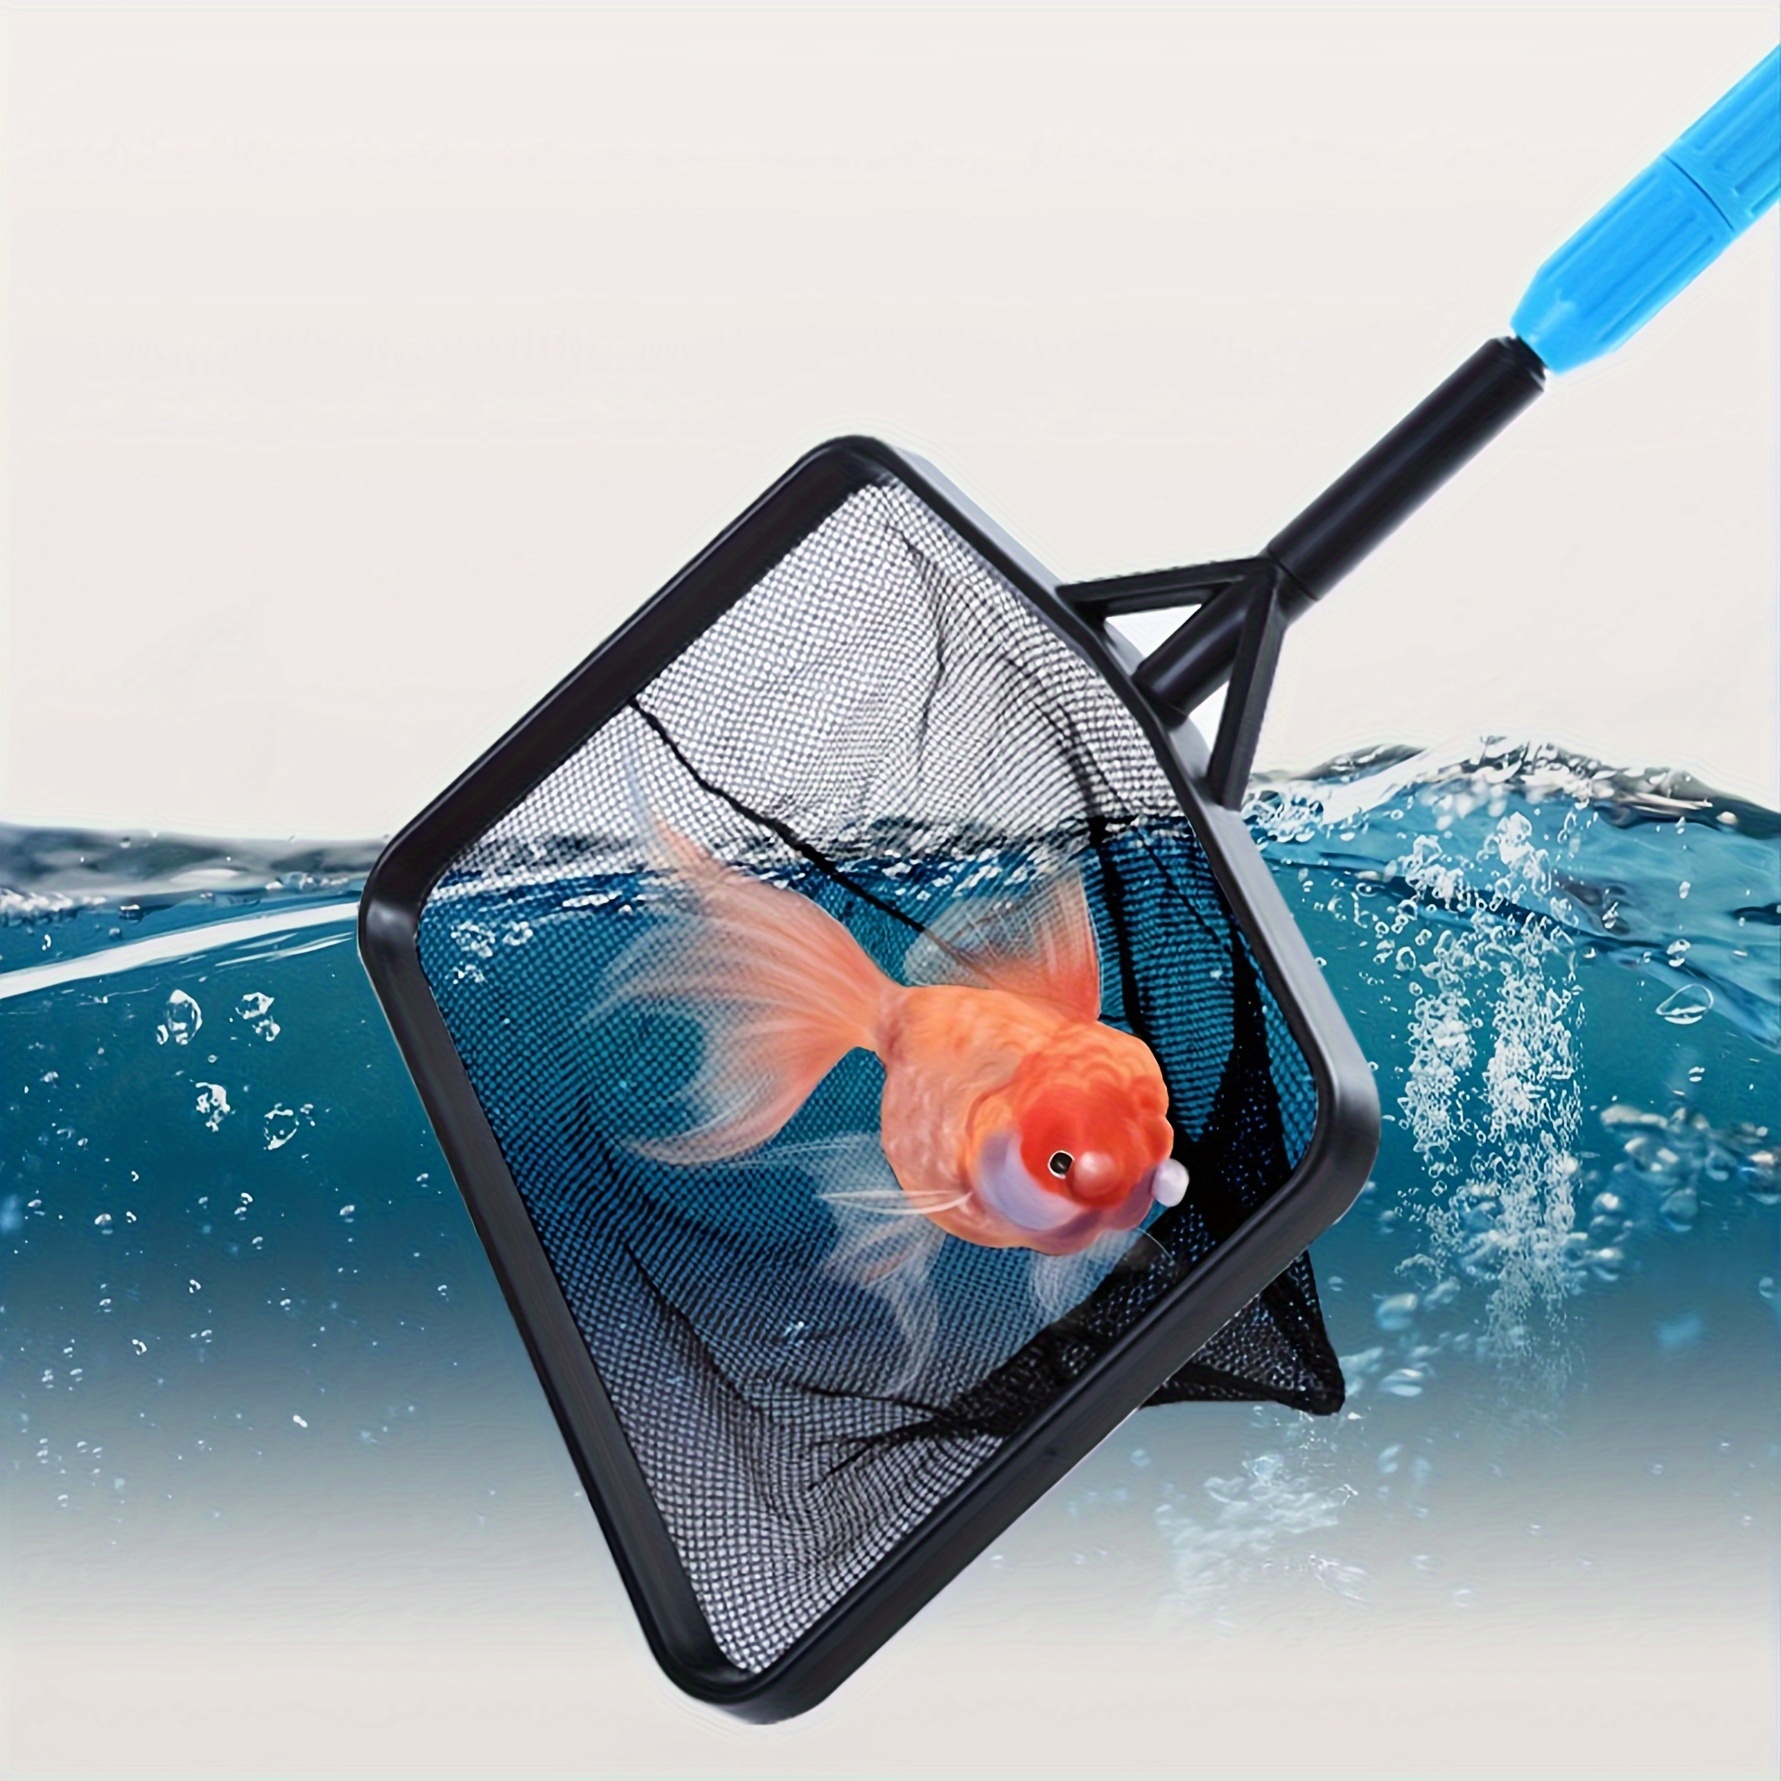 Fish Net for Fish Tank, Fish Net for Catching &Releasing Durable